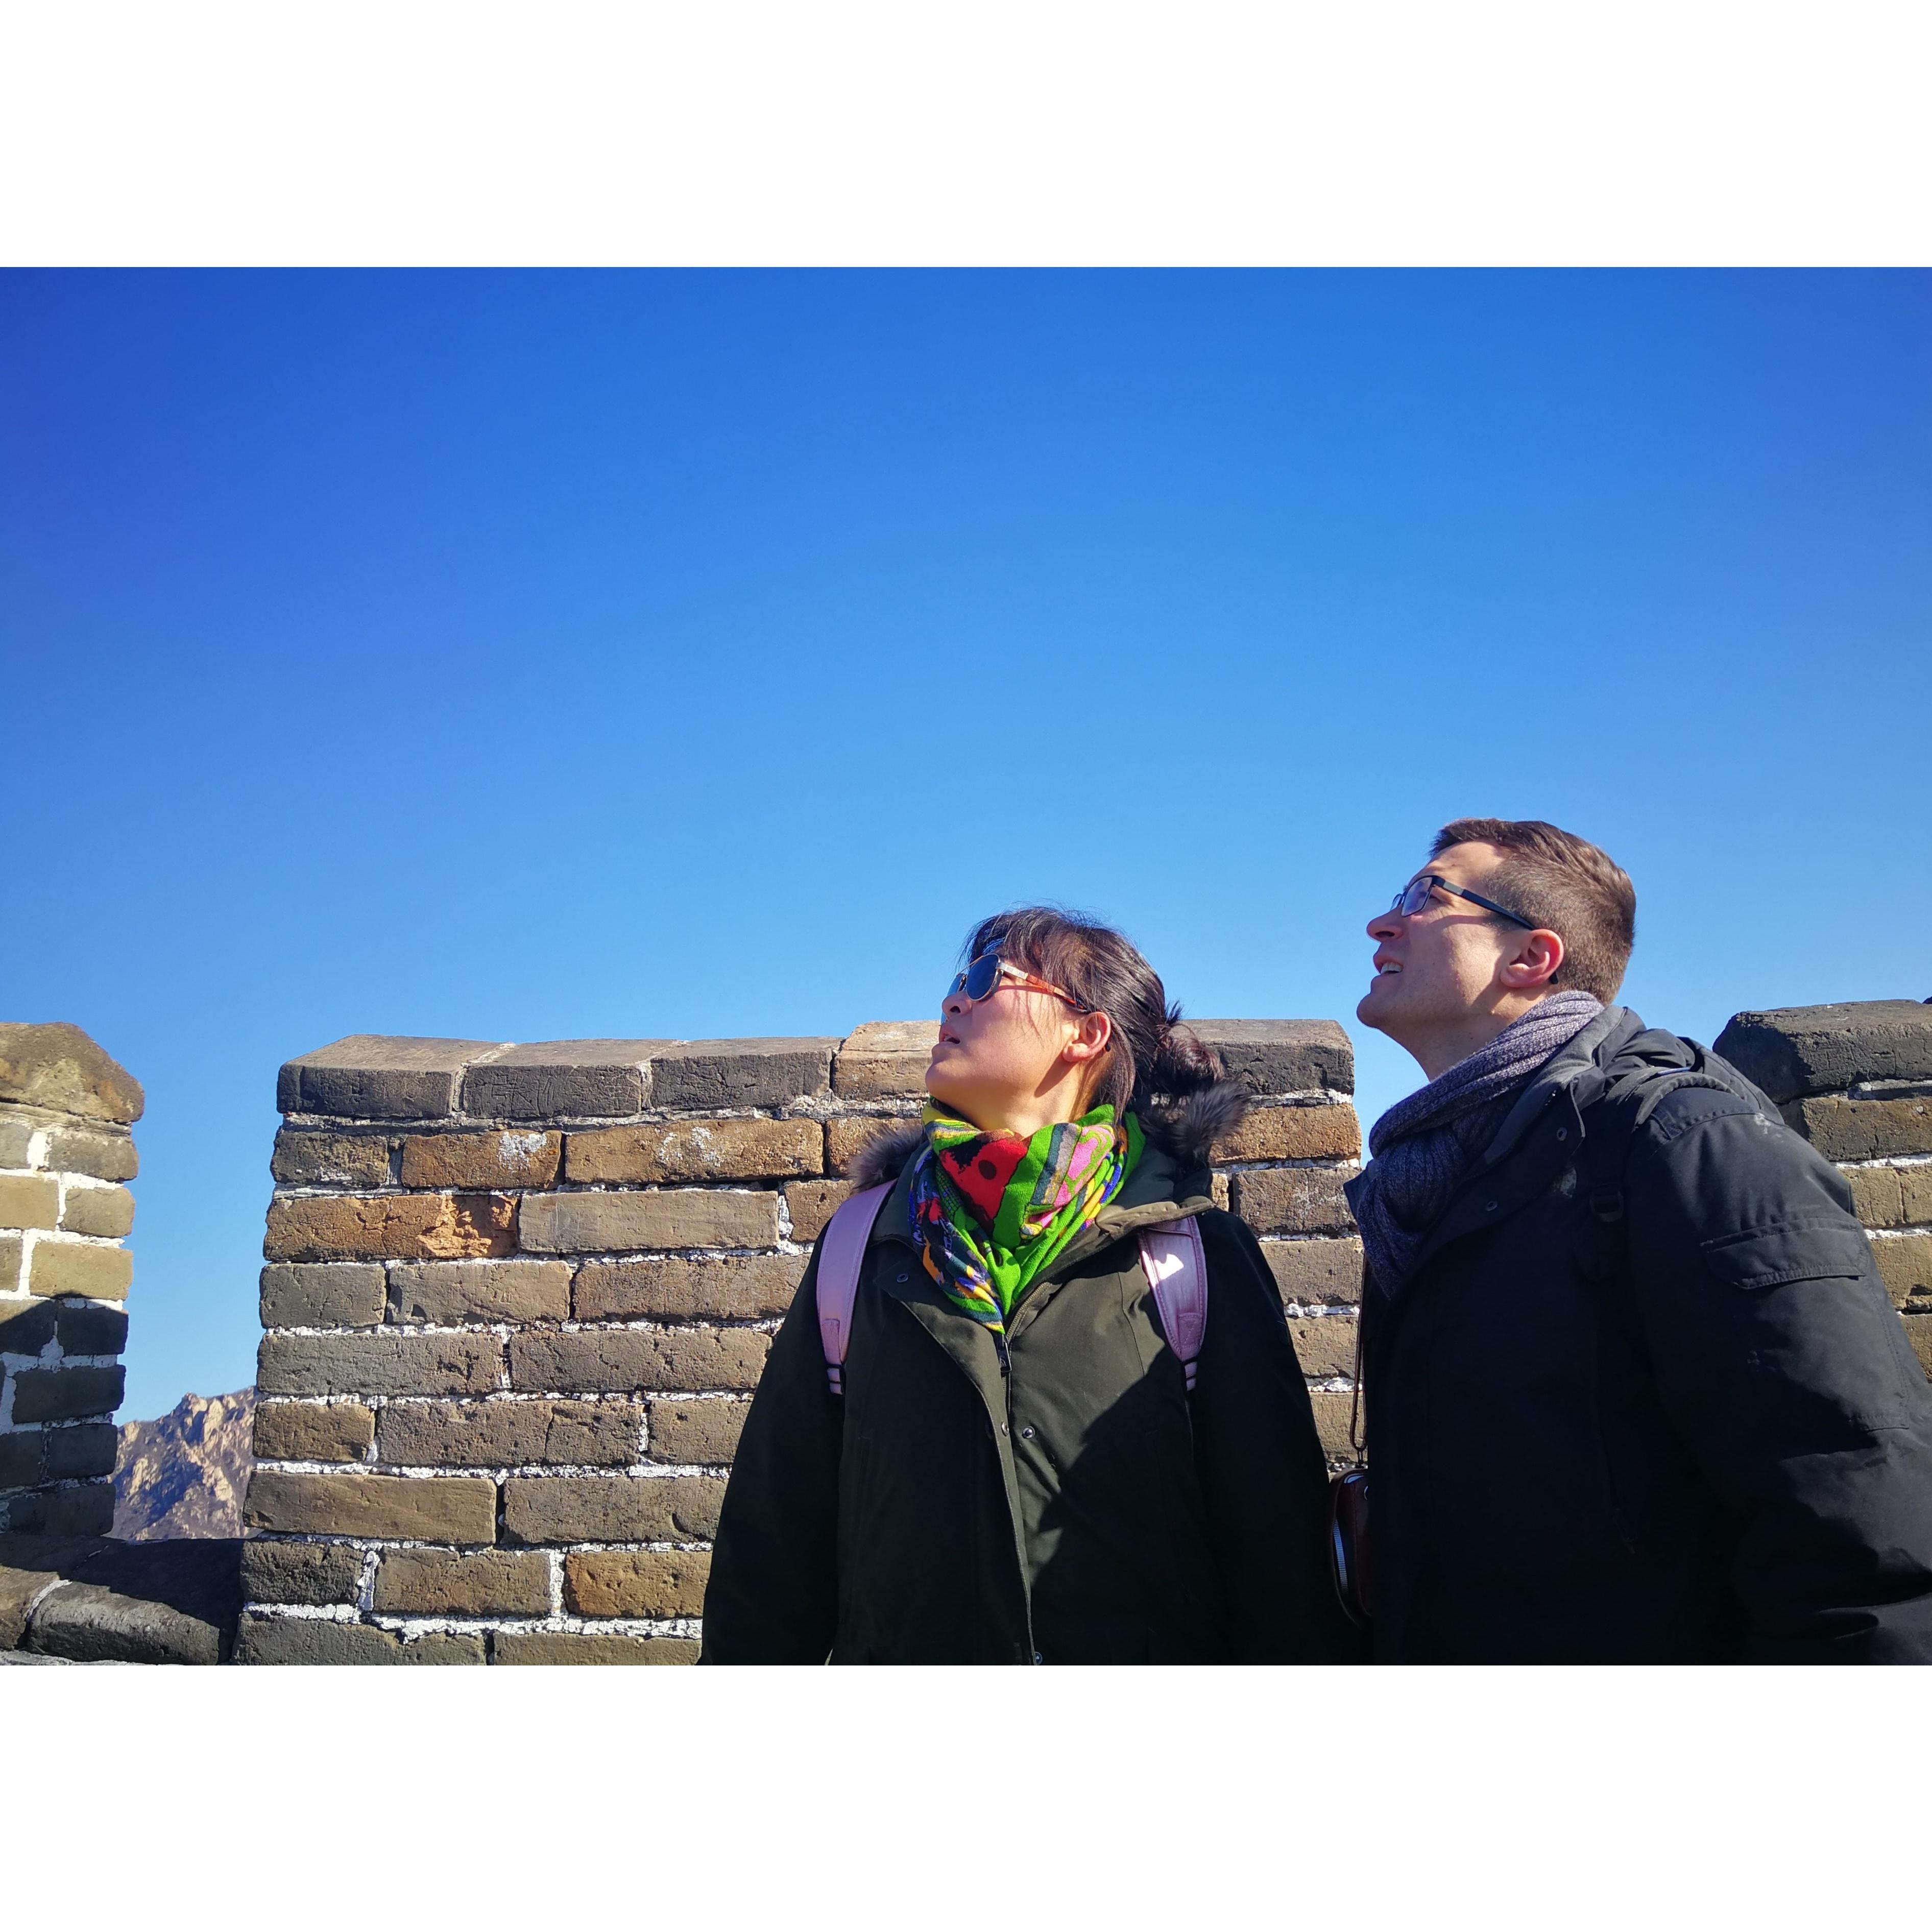 Xiaosy and Jaredsy birdwatching on the Great Wall